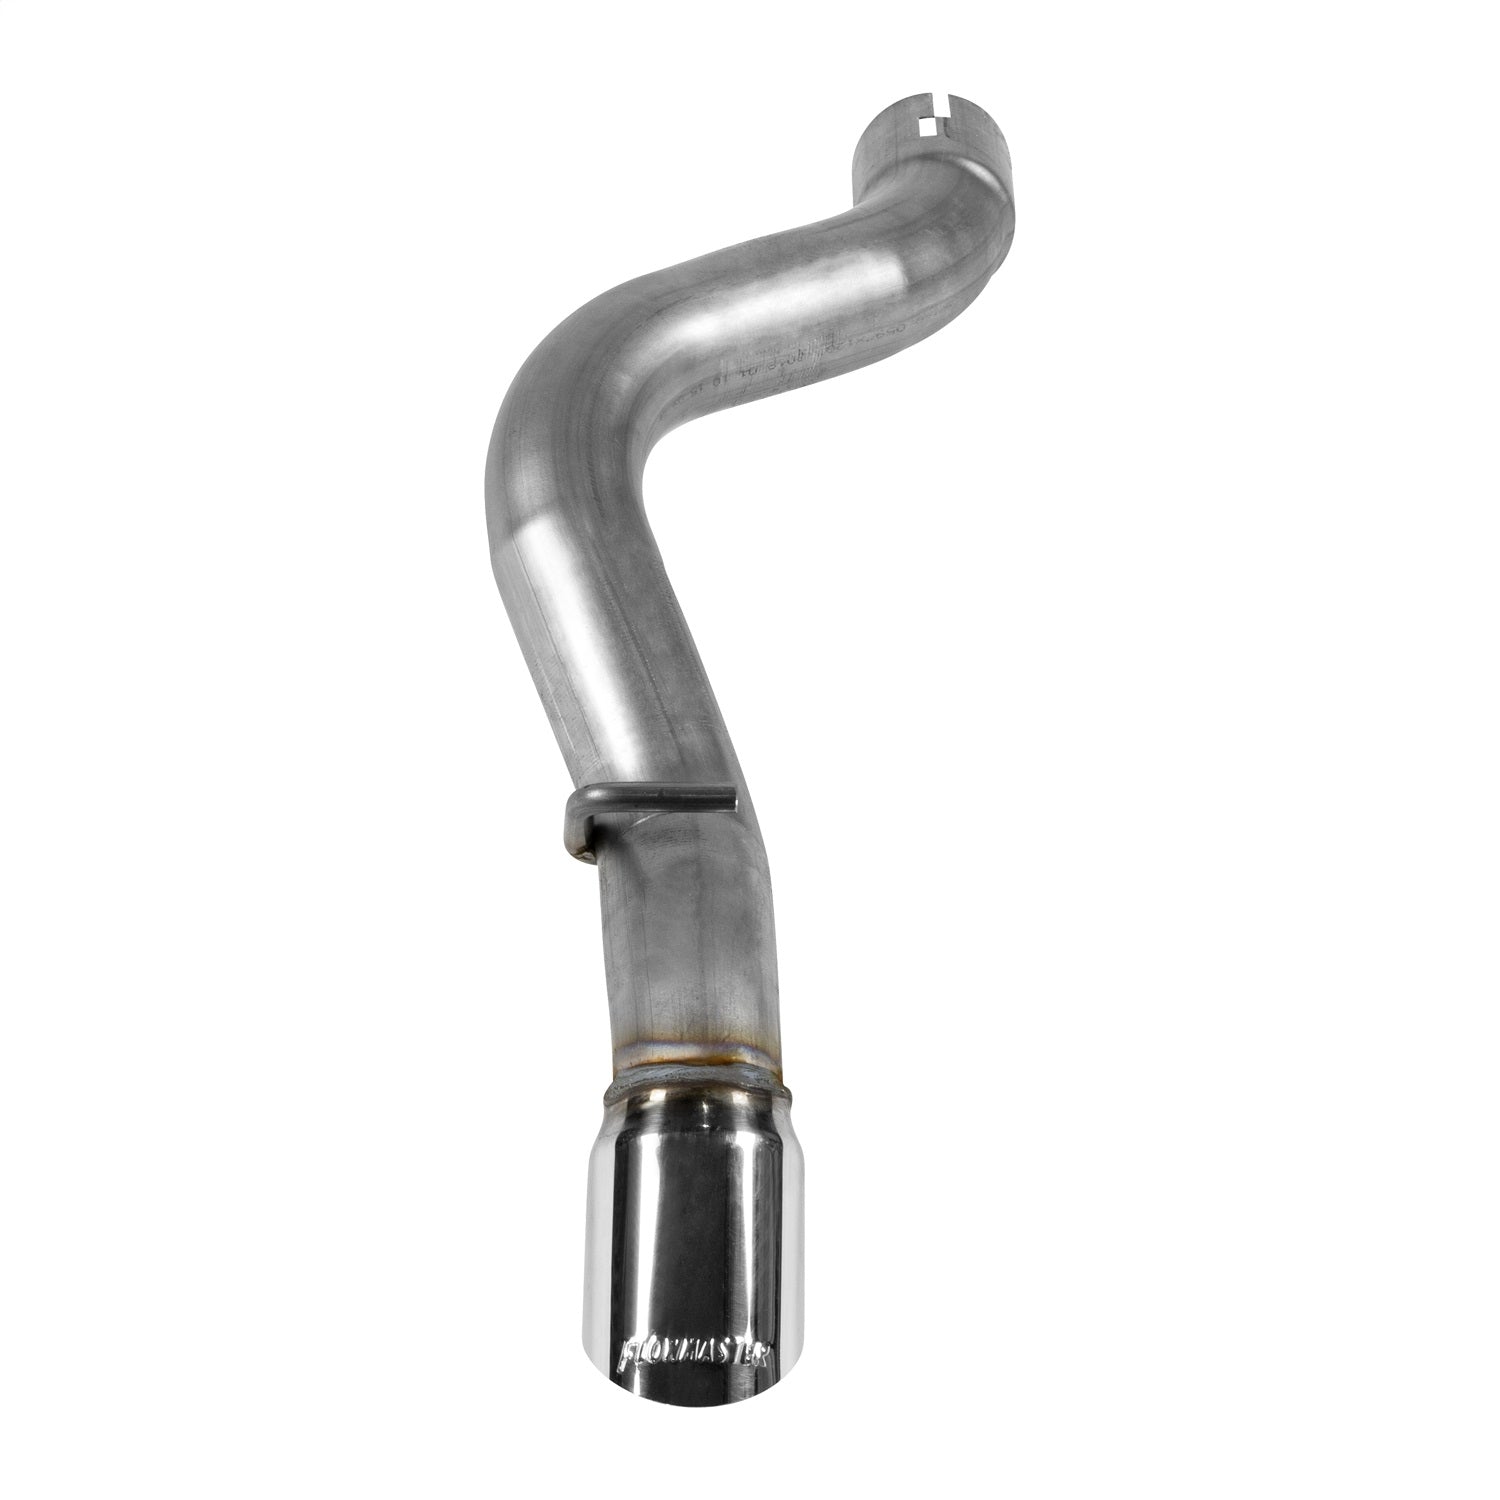 Flowmaster 817837 American Thunder Axle Back Exhaust System Fits Wrangler (JL)